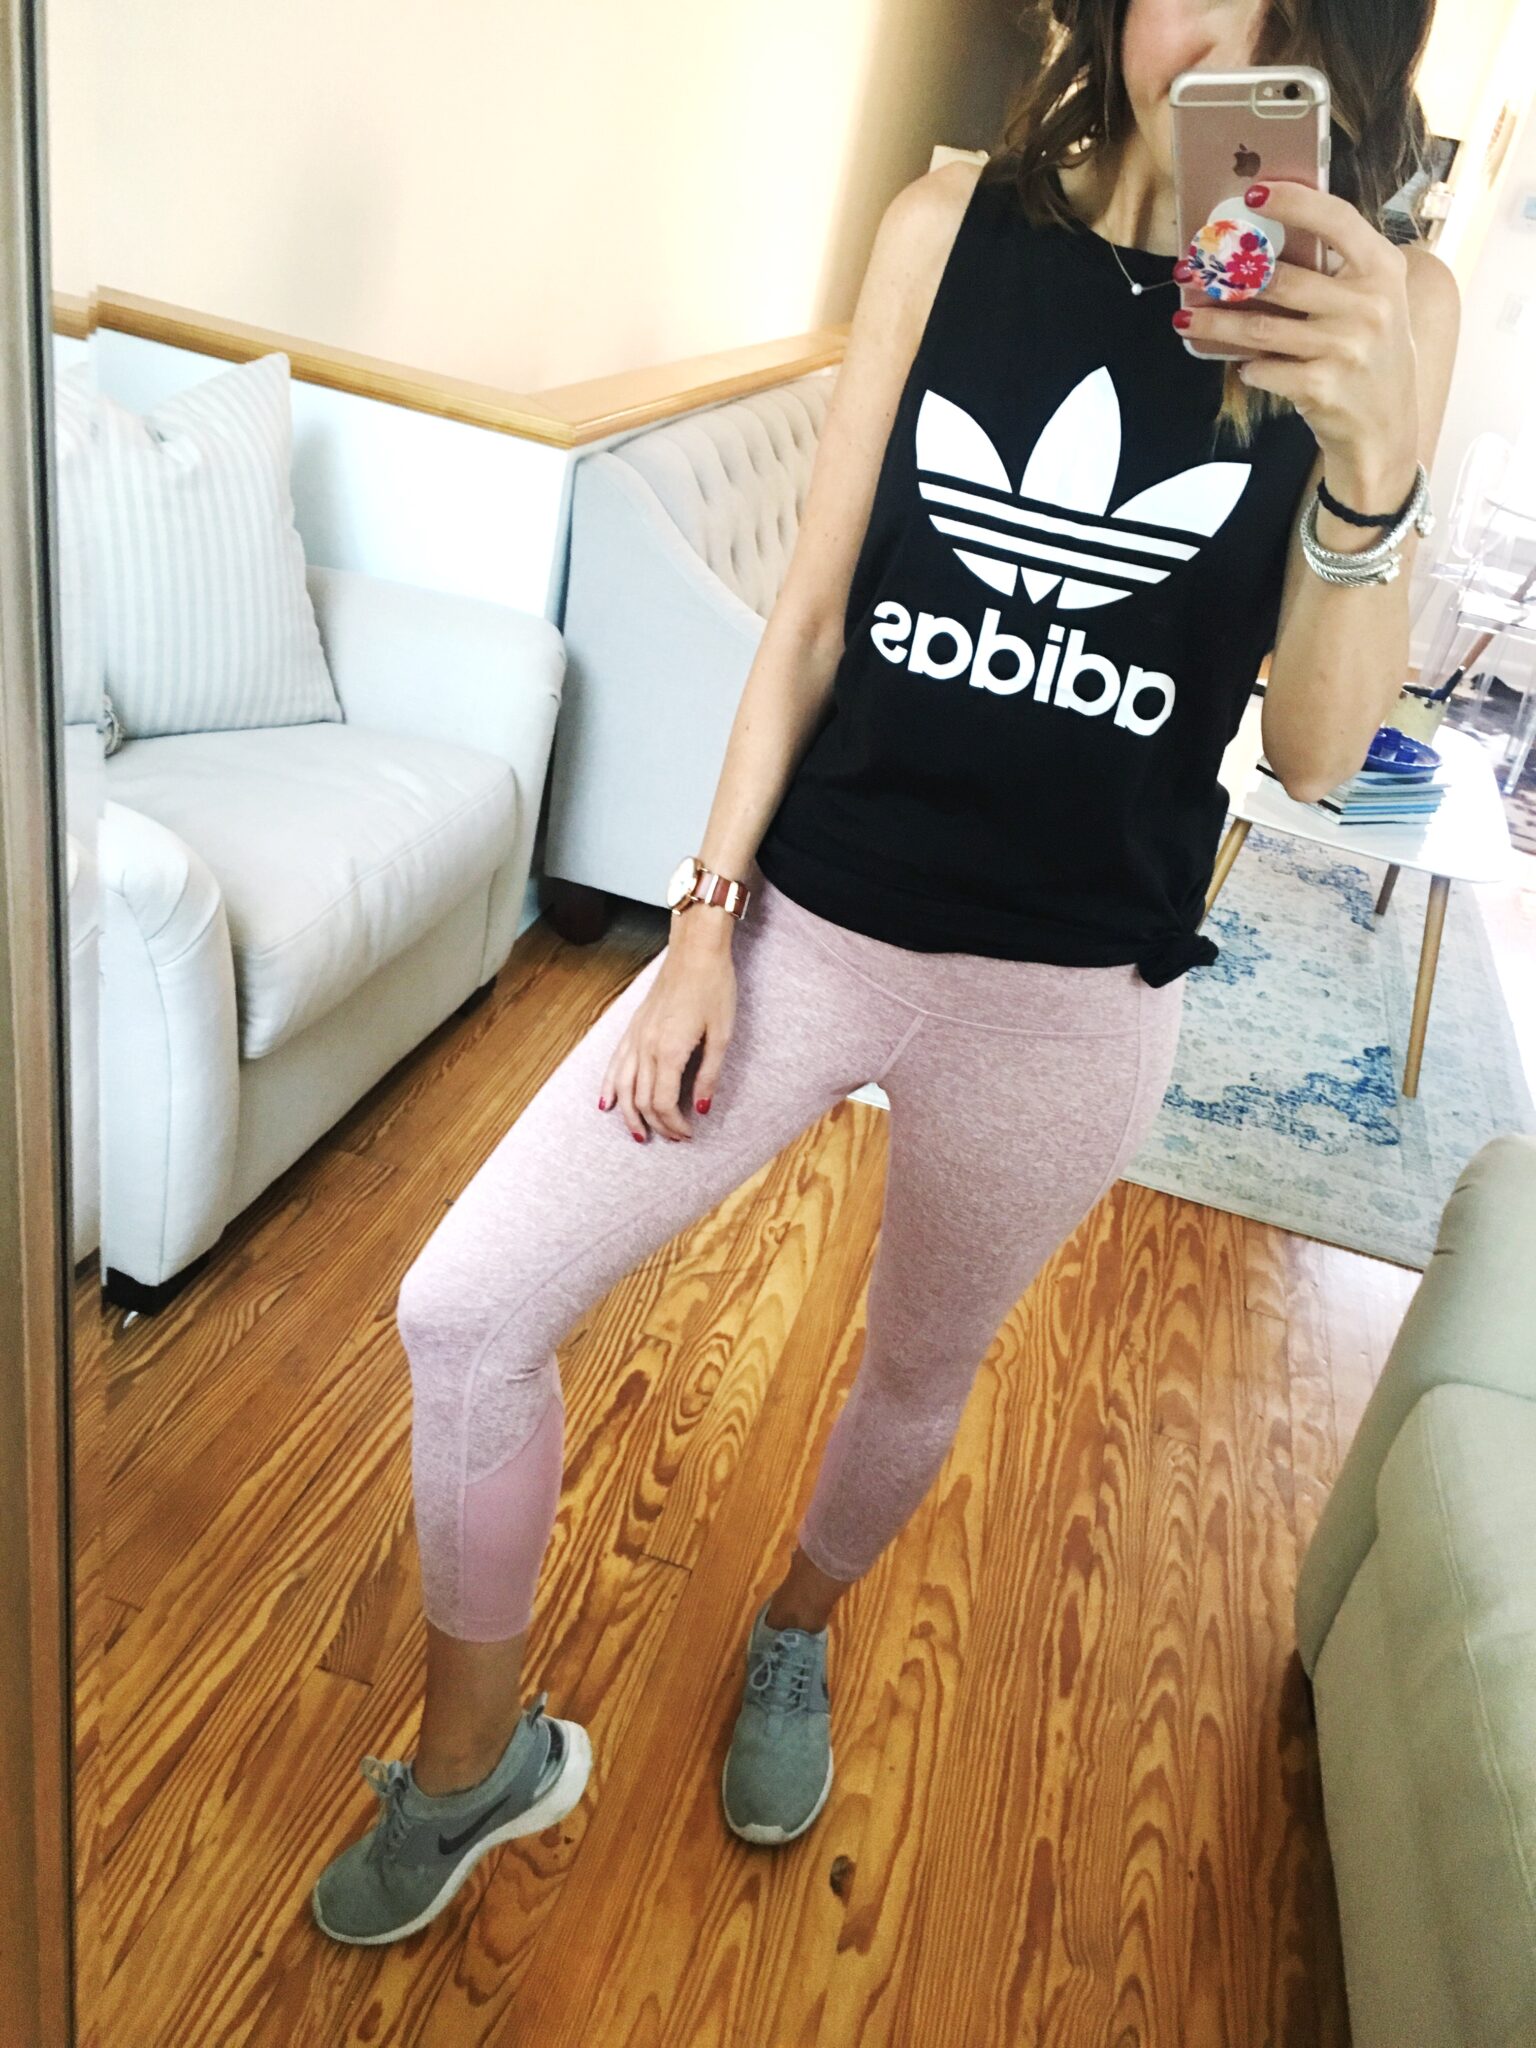 Blush Workout Leggings - Nordstrom Anniversary Sale Try On Session by popular Washington DC style blogger Cobalt Chronicles